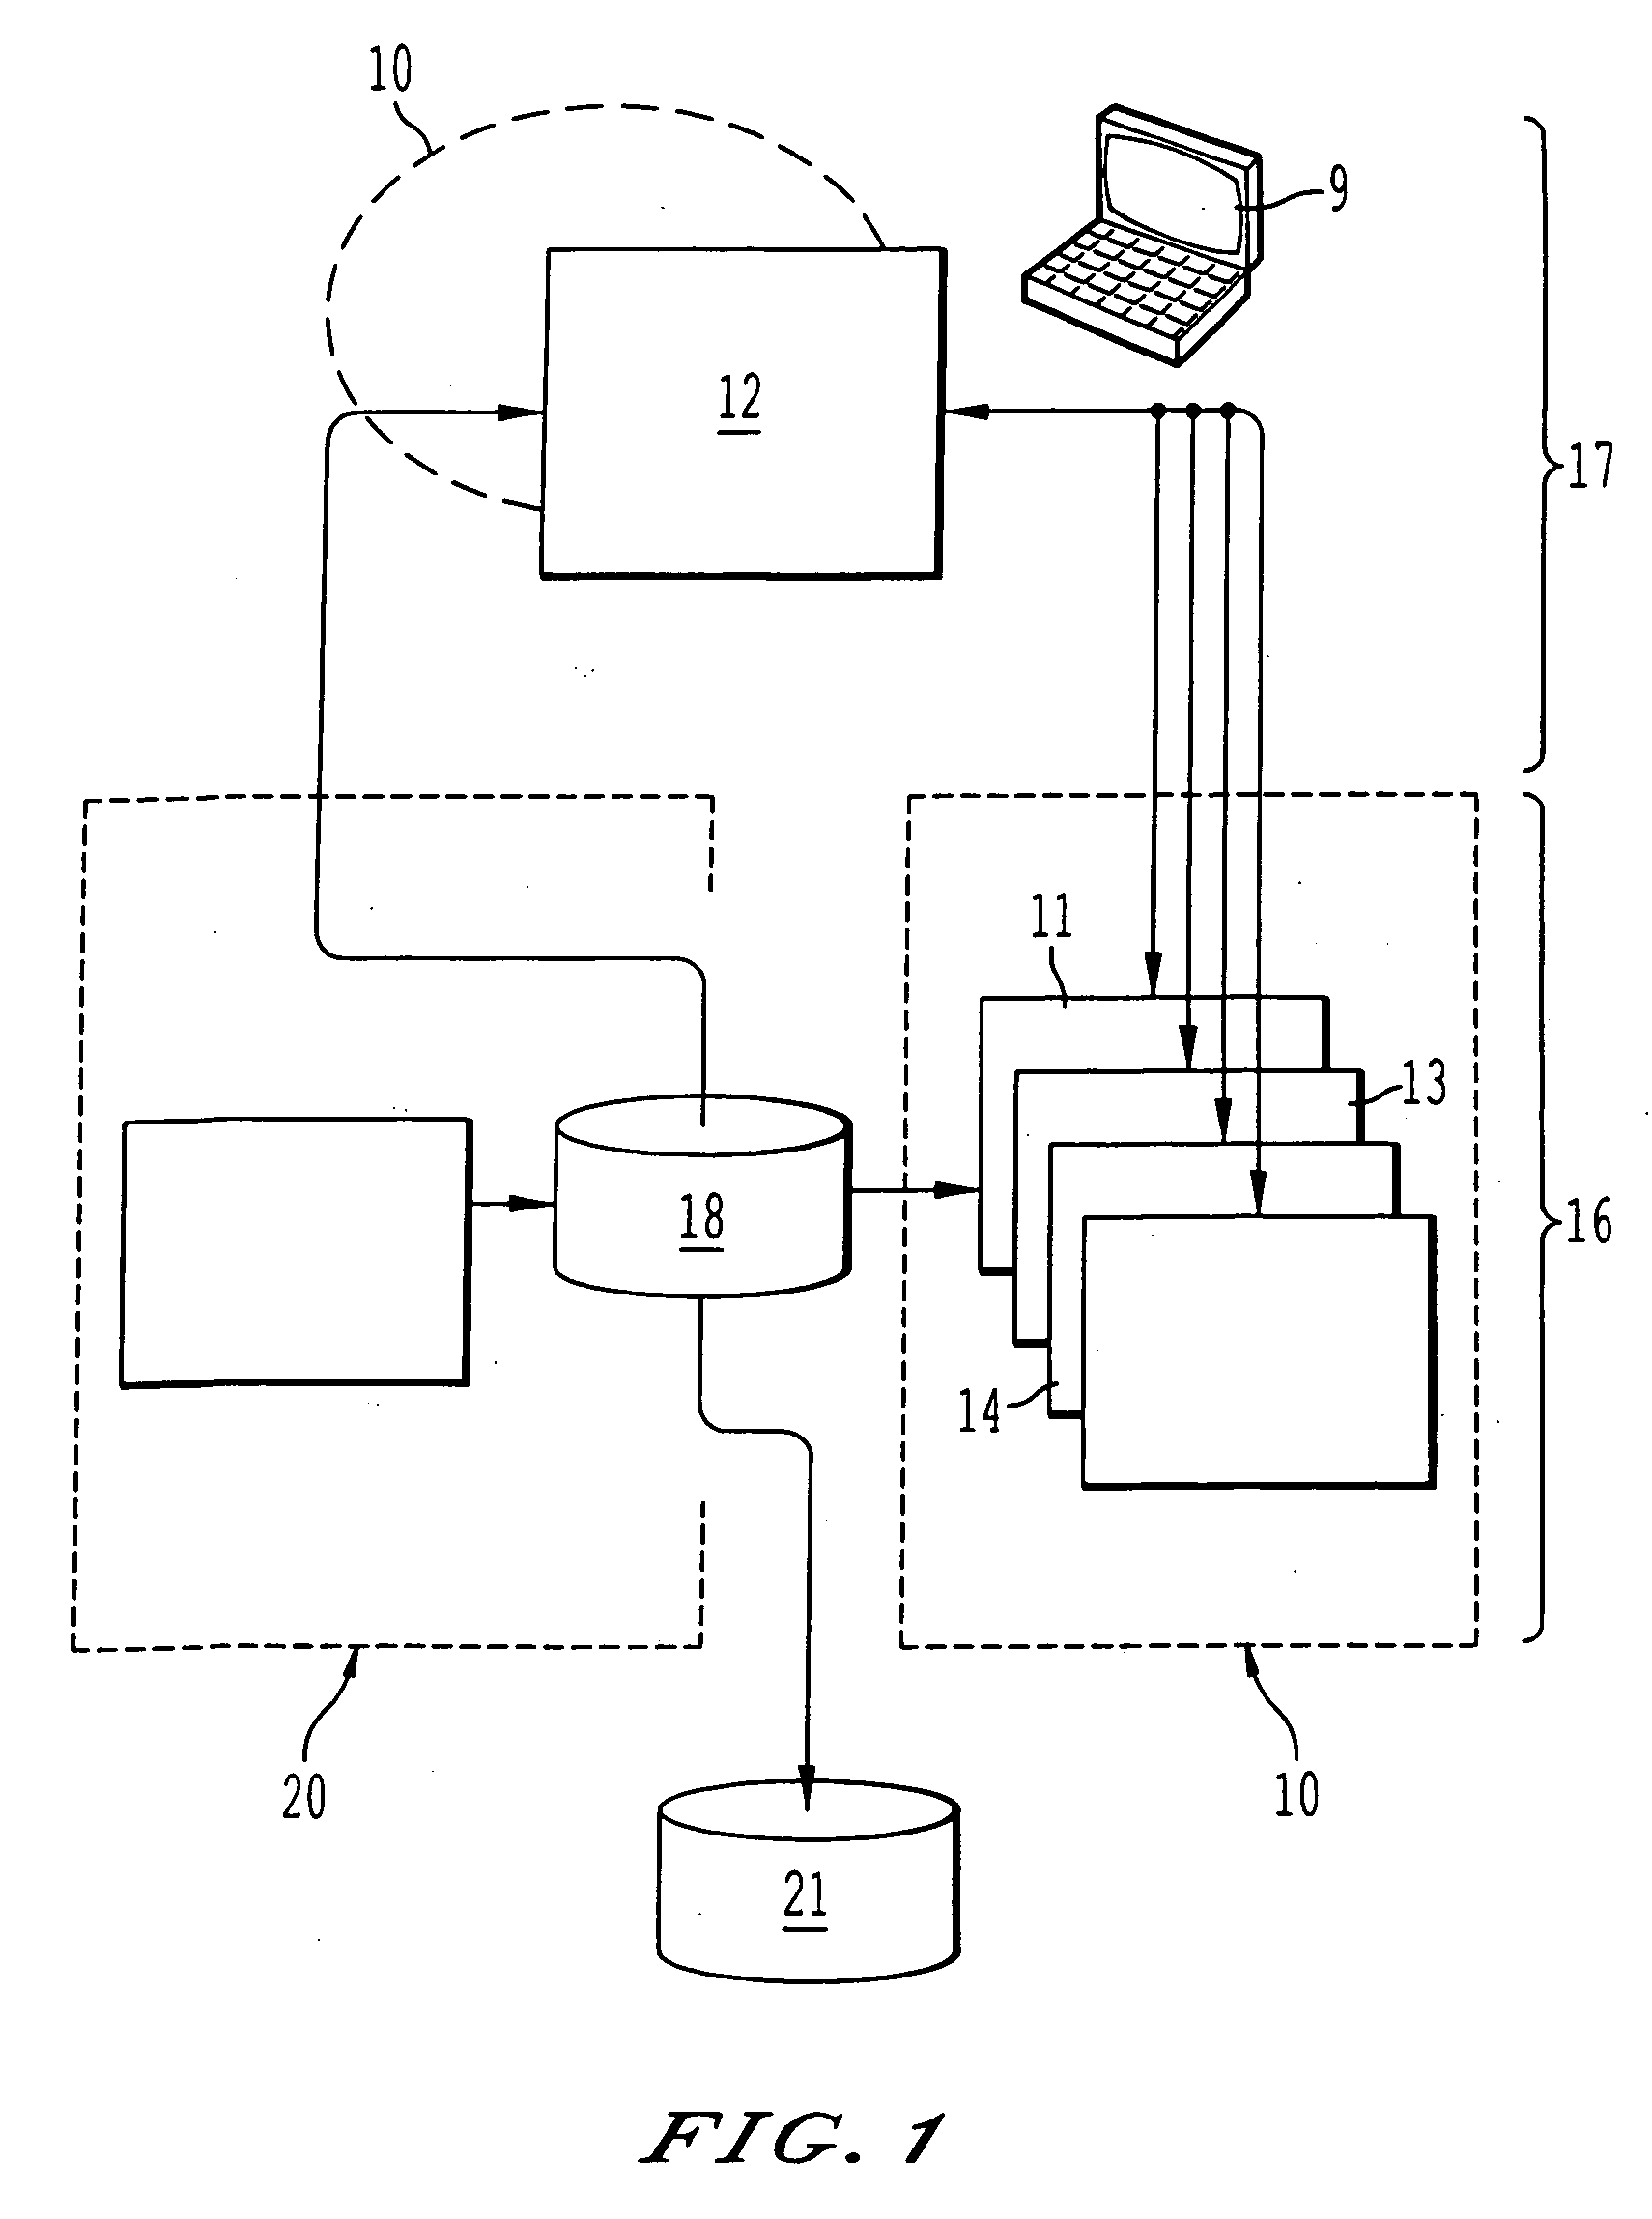 Process for structuring and managing the configuration of industrial products, and particularly aircraft